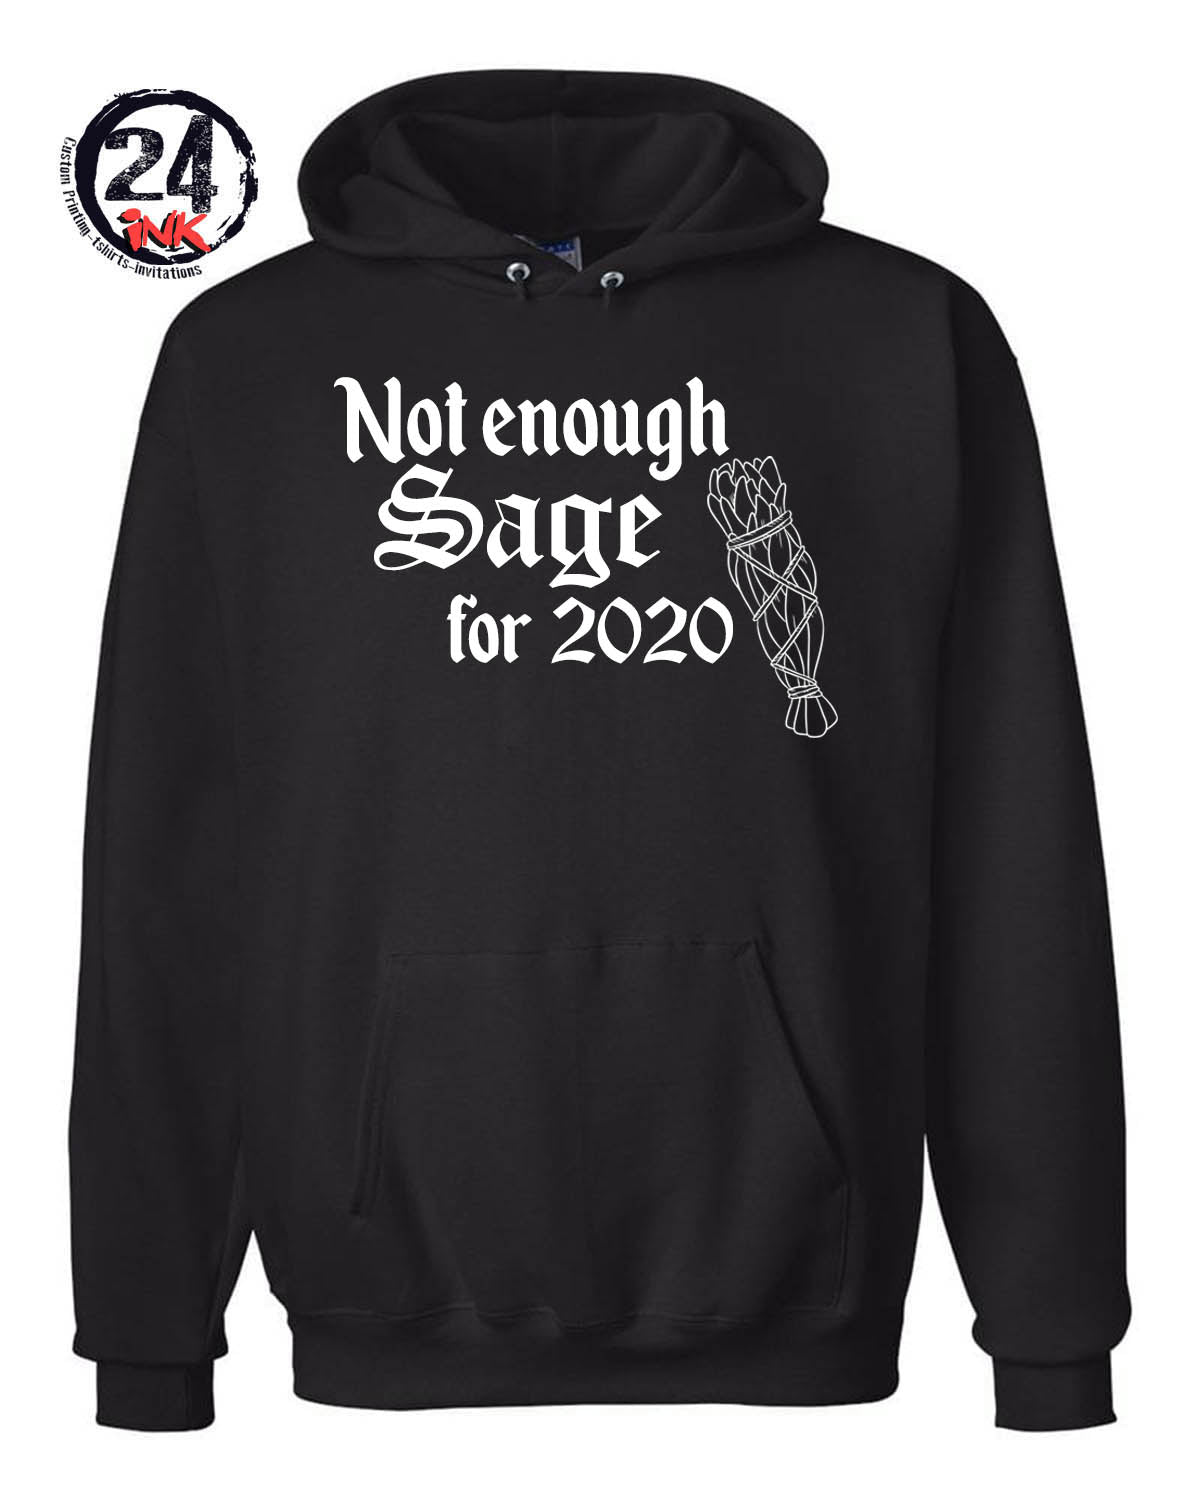 Not enough sage for 2020 Hooded Sweatshirt